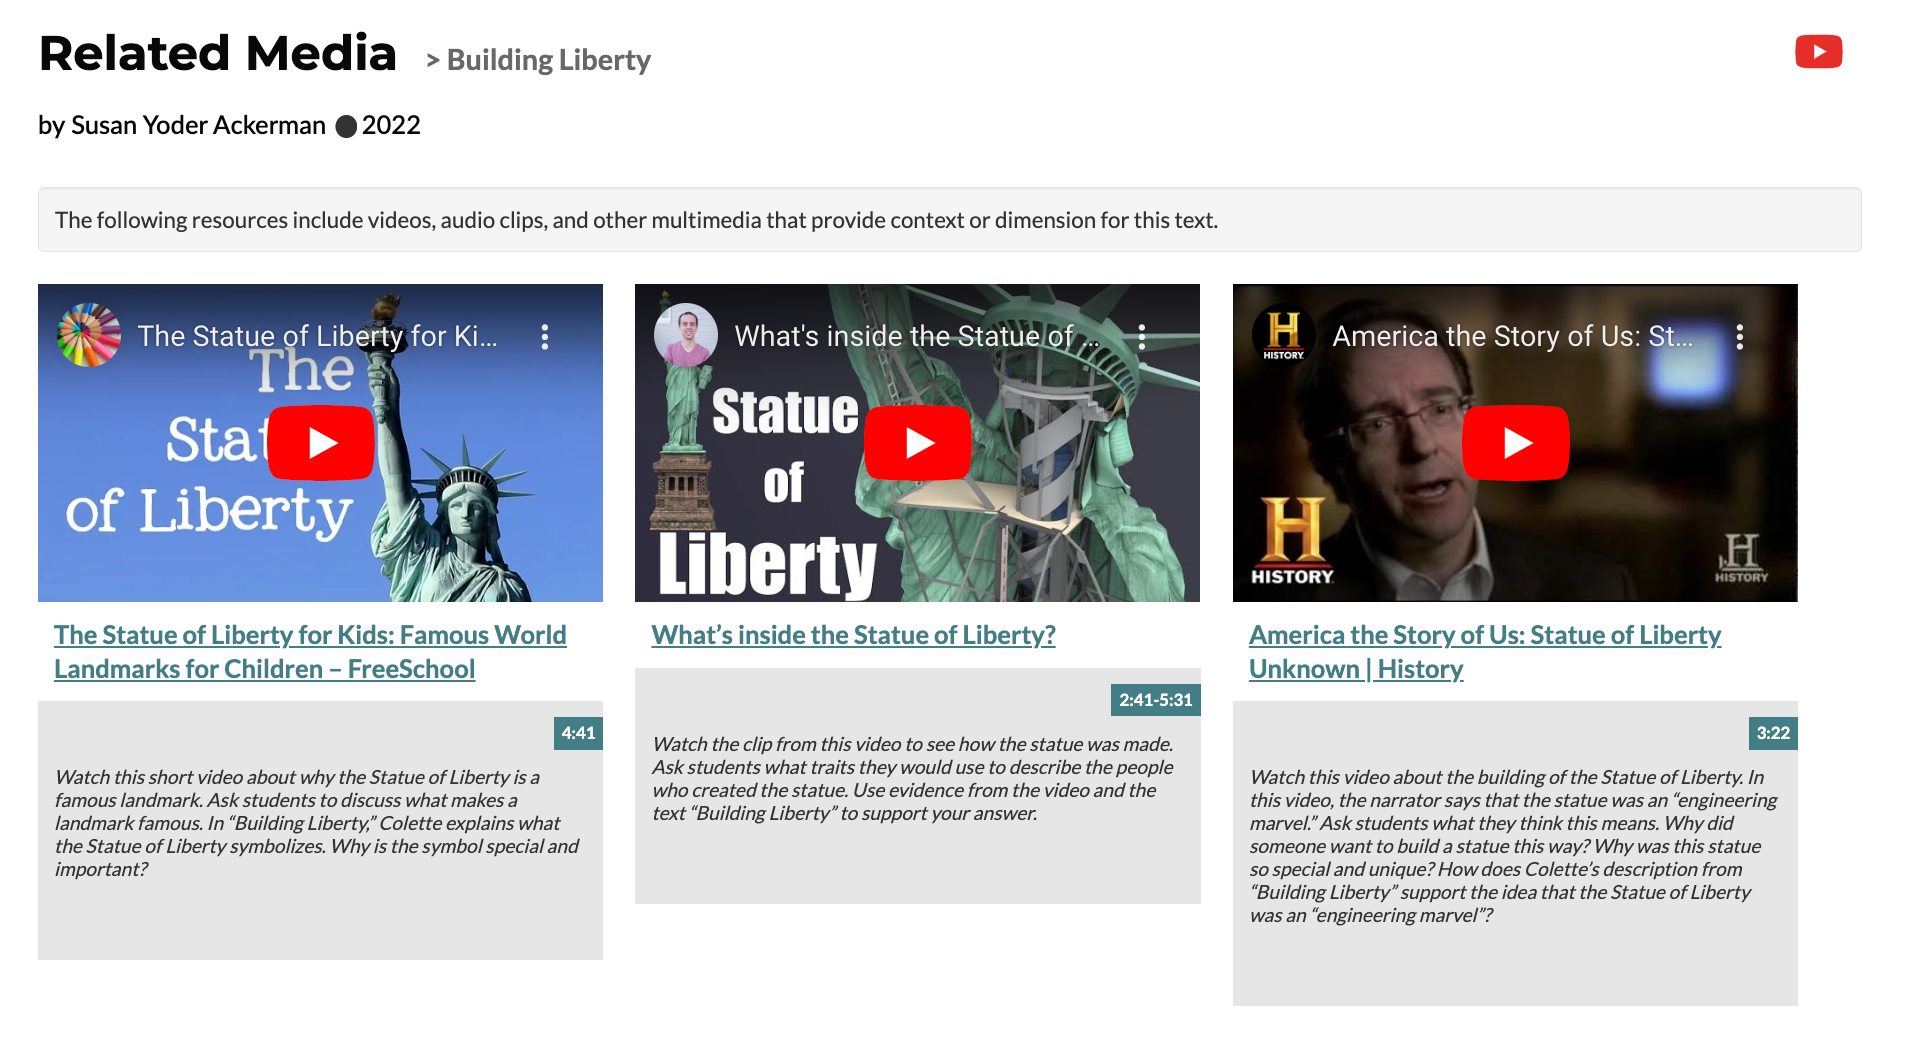 CommonLit Related Media for "Building Liberty" by Susan Yoder Ackerman